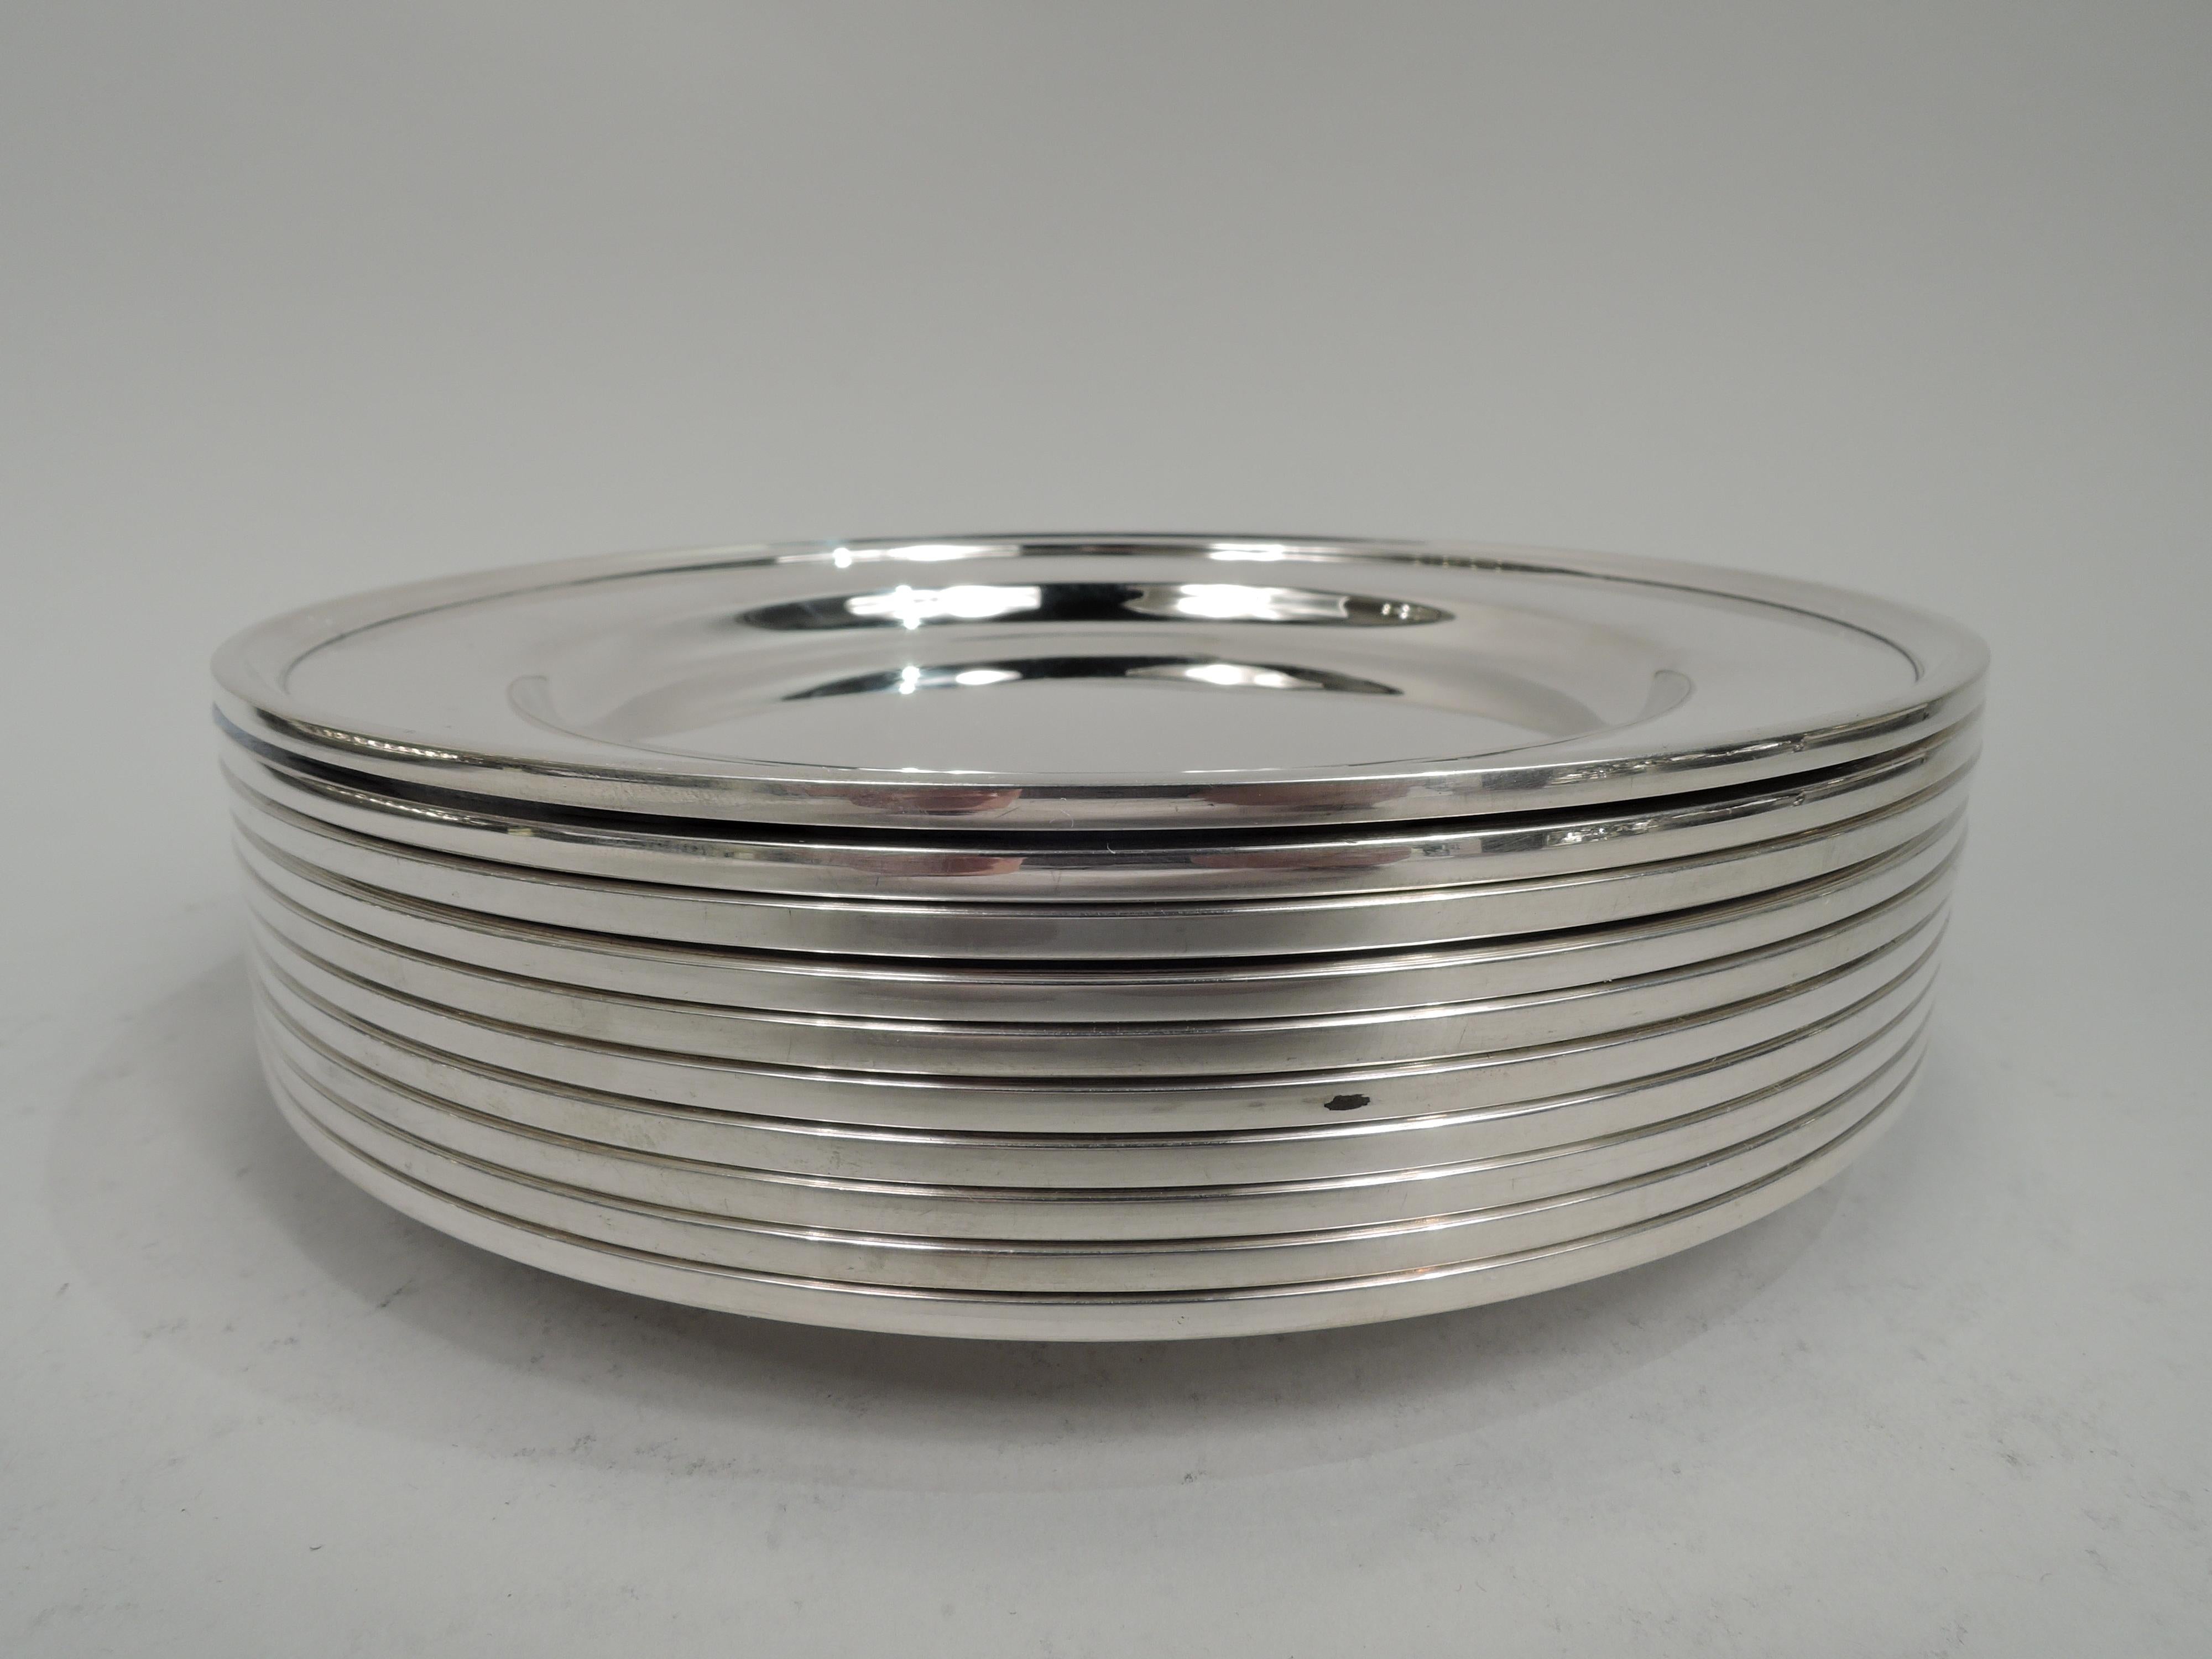 Set of 10 Modern sterling silver bread & butter plates. Made by S. Kirk & Son Inc. in Baltimore. Round well, wide shoulder, and molded rim. Fully marked including maker’s stamp (1925-32) and no. 4100. Total weight: 44.5 troy ounces.